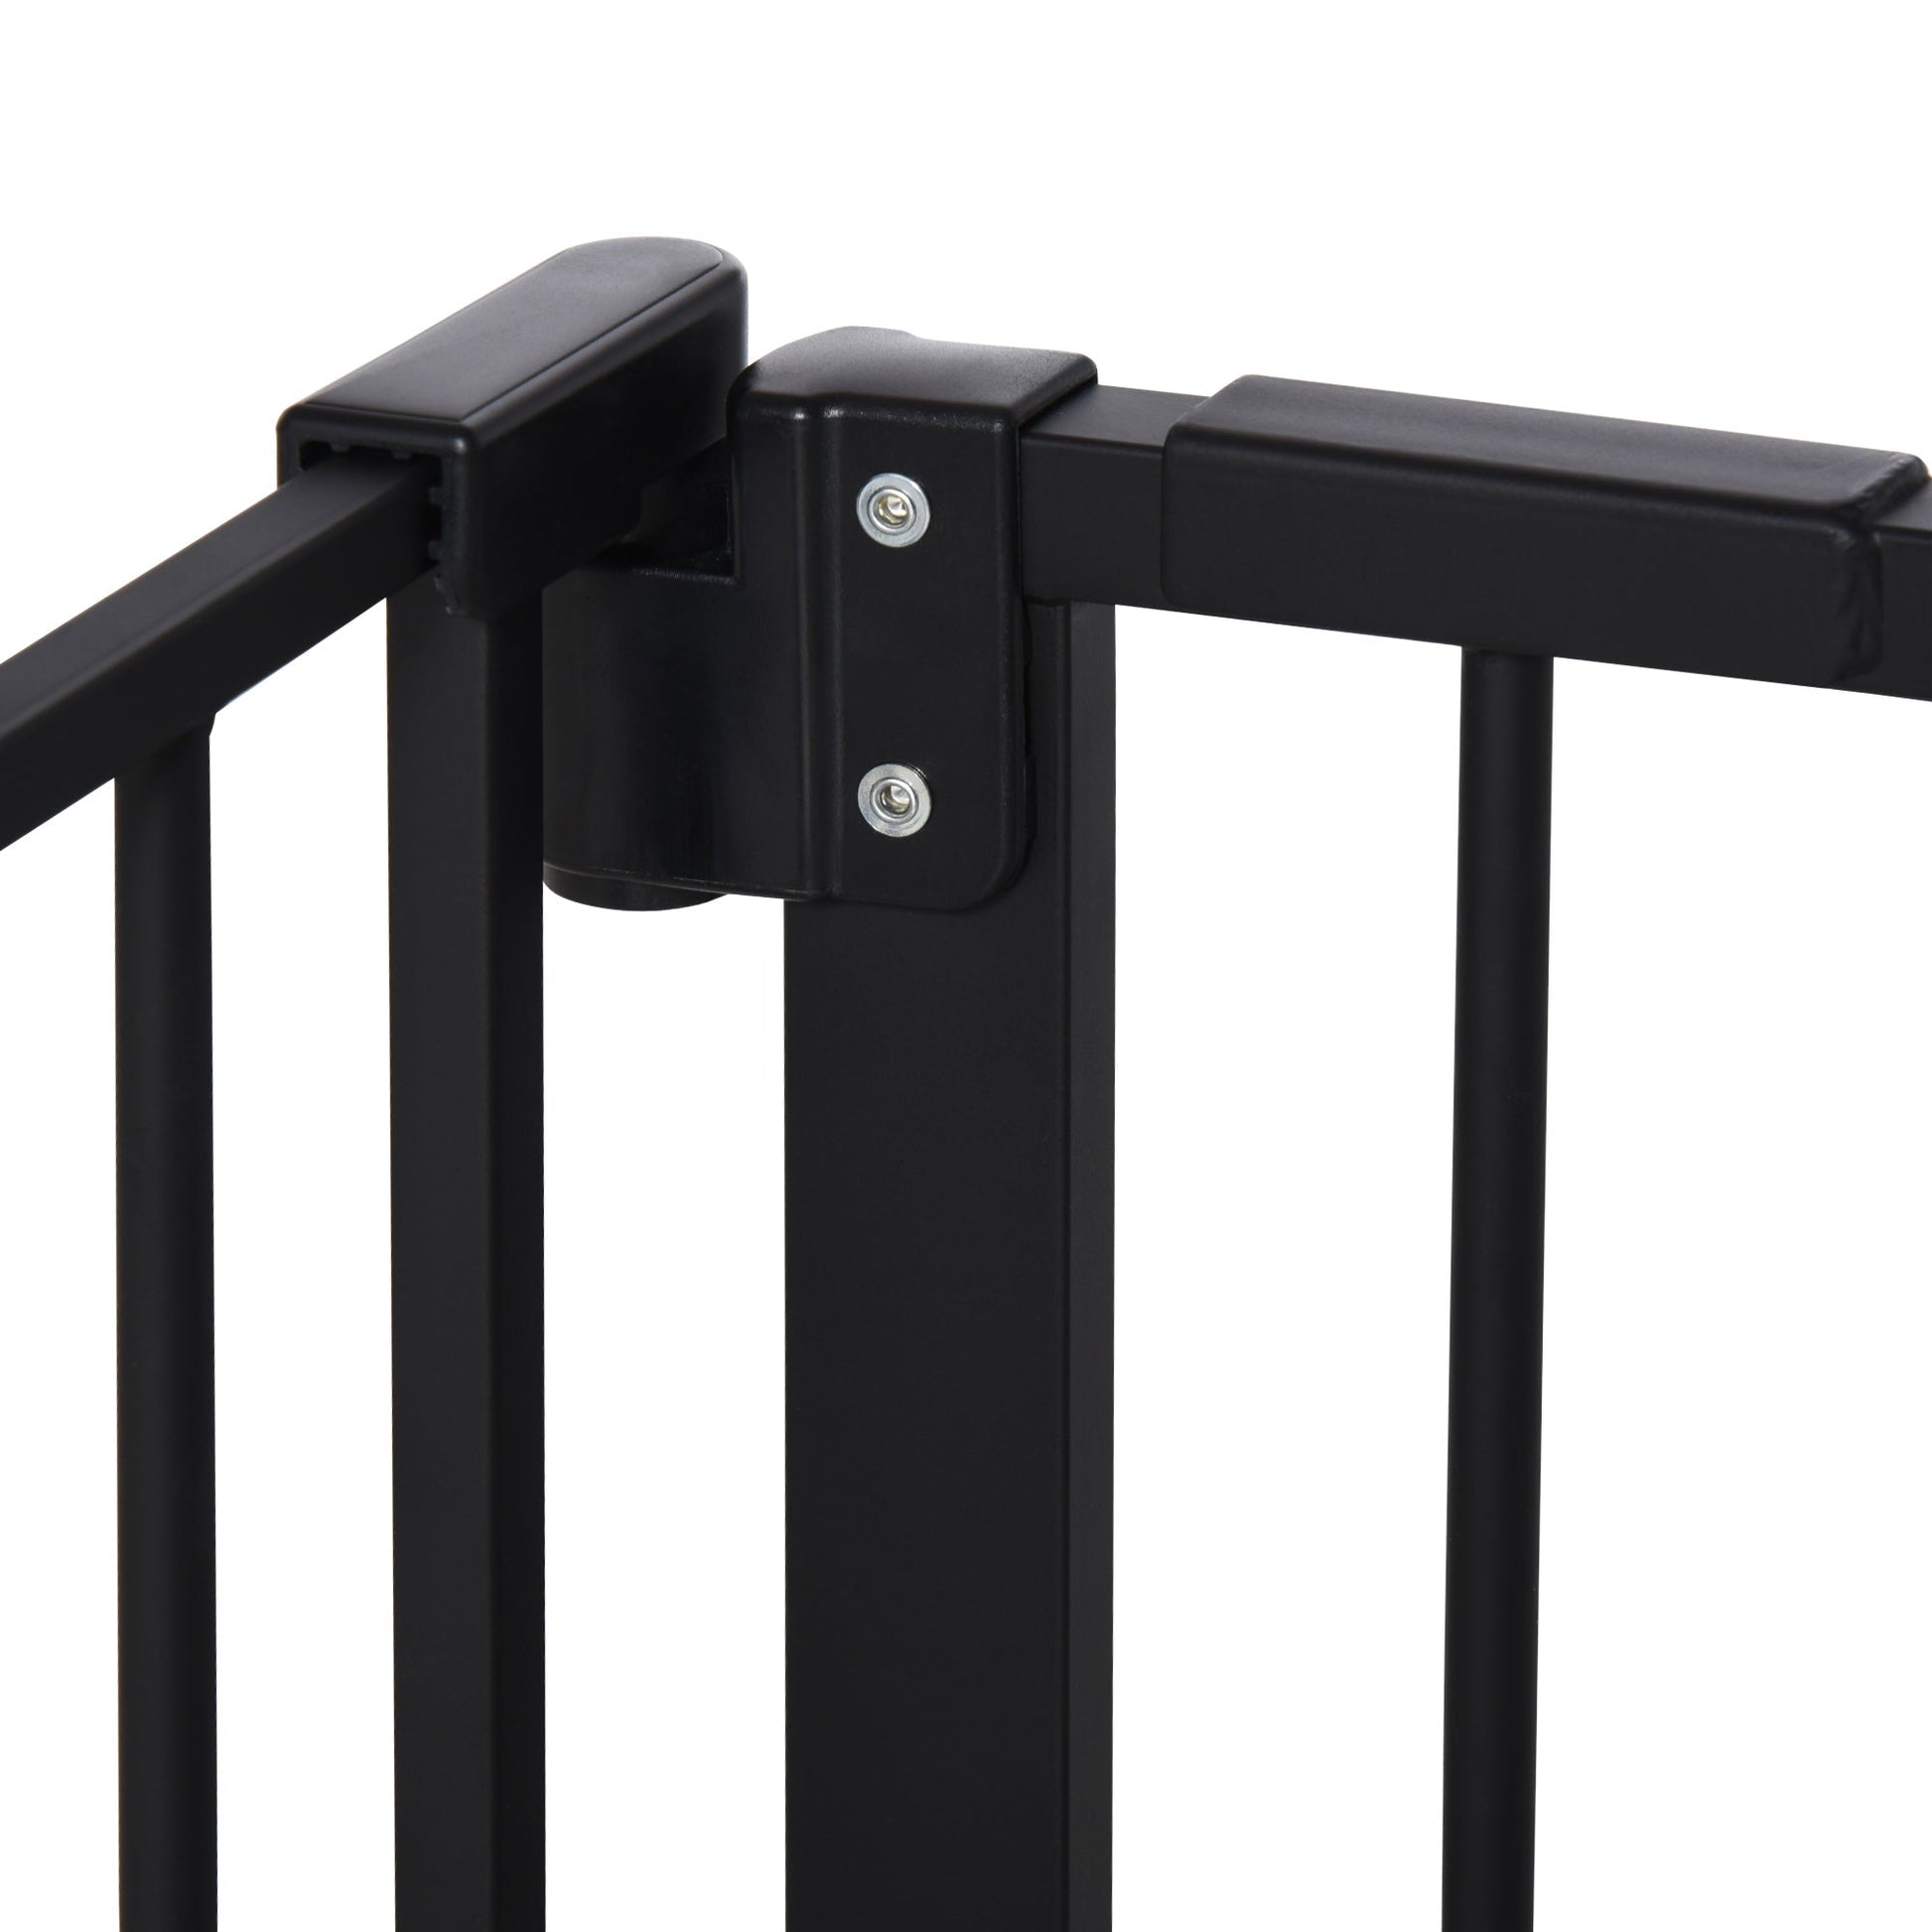 30 Inch Tall Pet Gate with Door Dog Gate and Barrier Indoor for Stairs Includes 7", 8", 12" Extensions Kit, Pressure-Mounted Safety Gate, Black - Gallery Canada